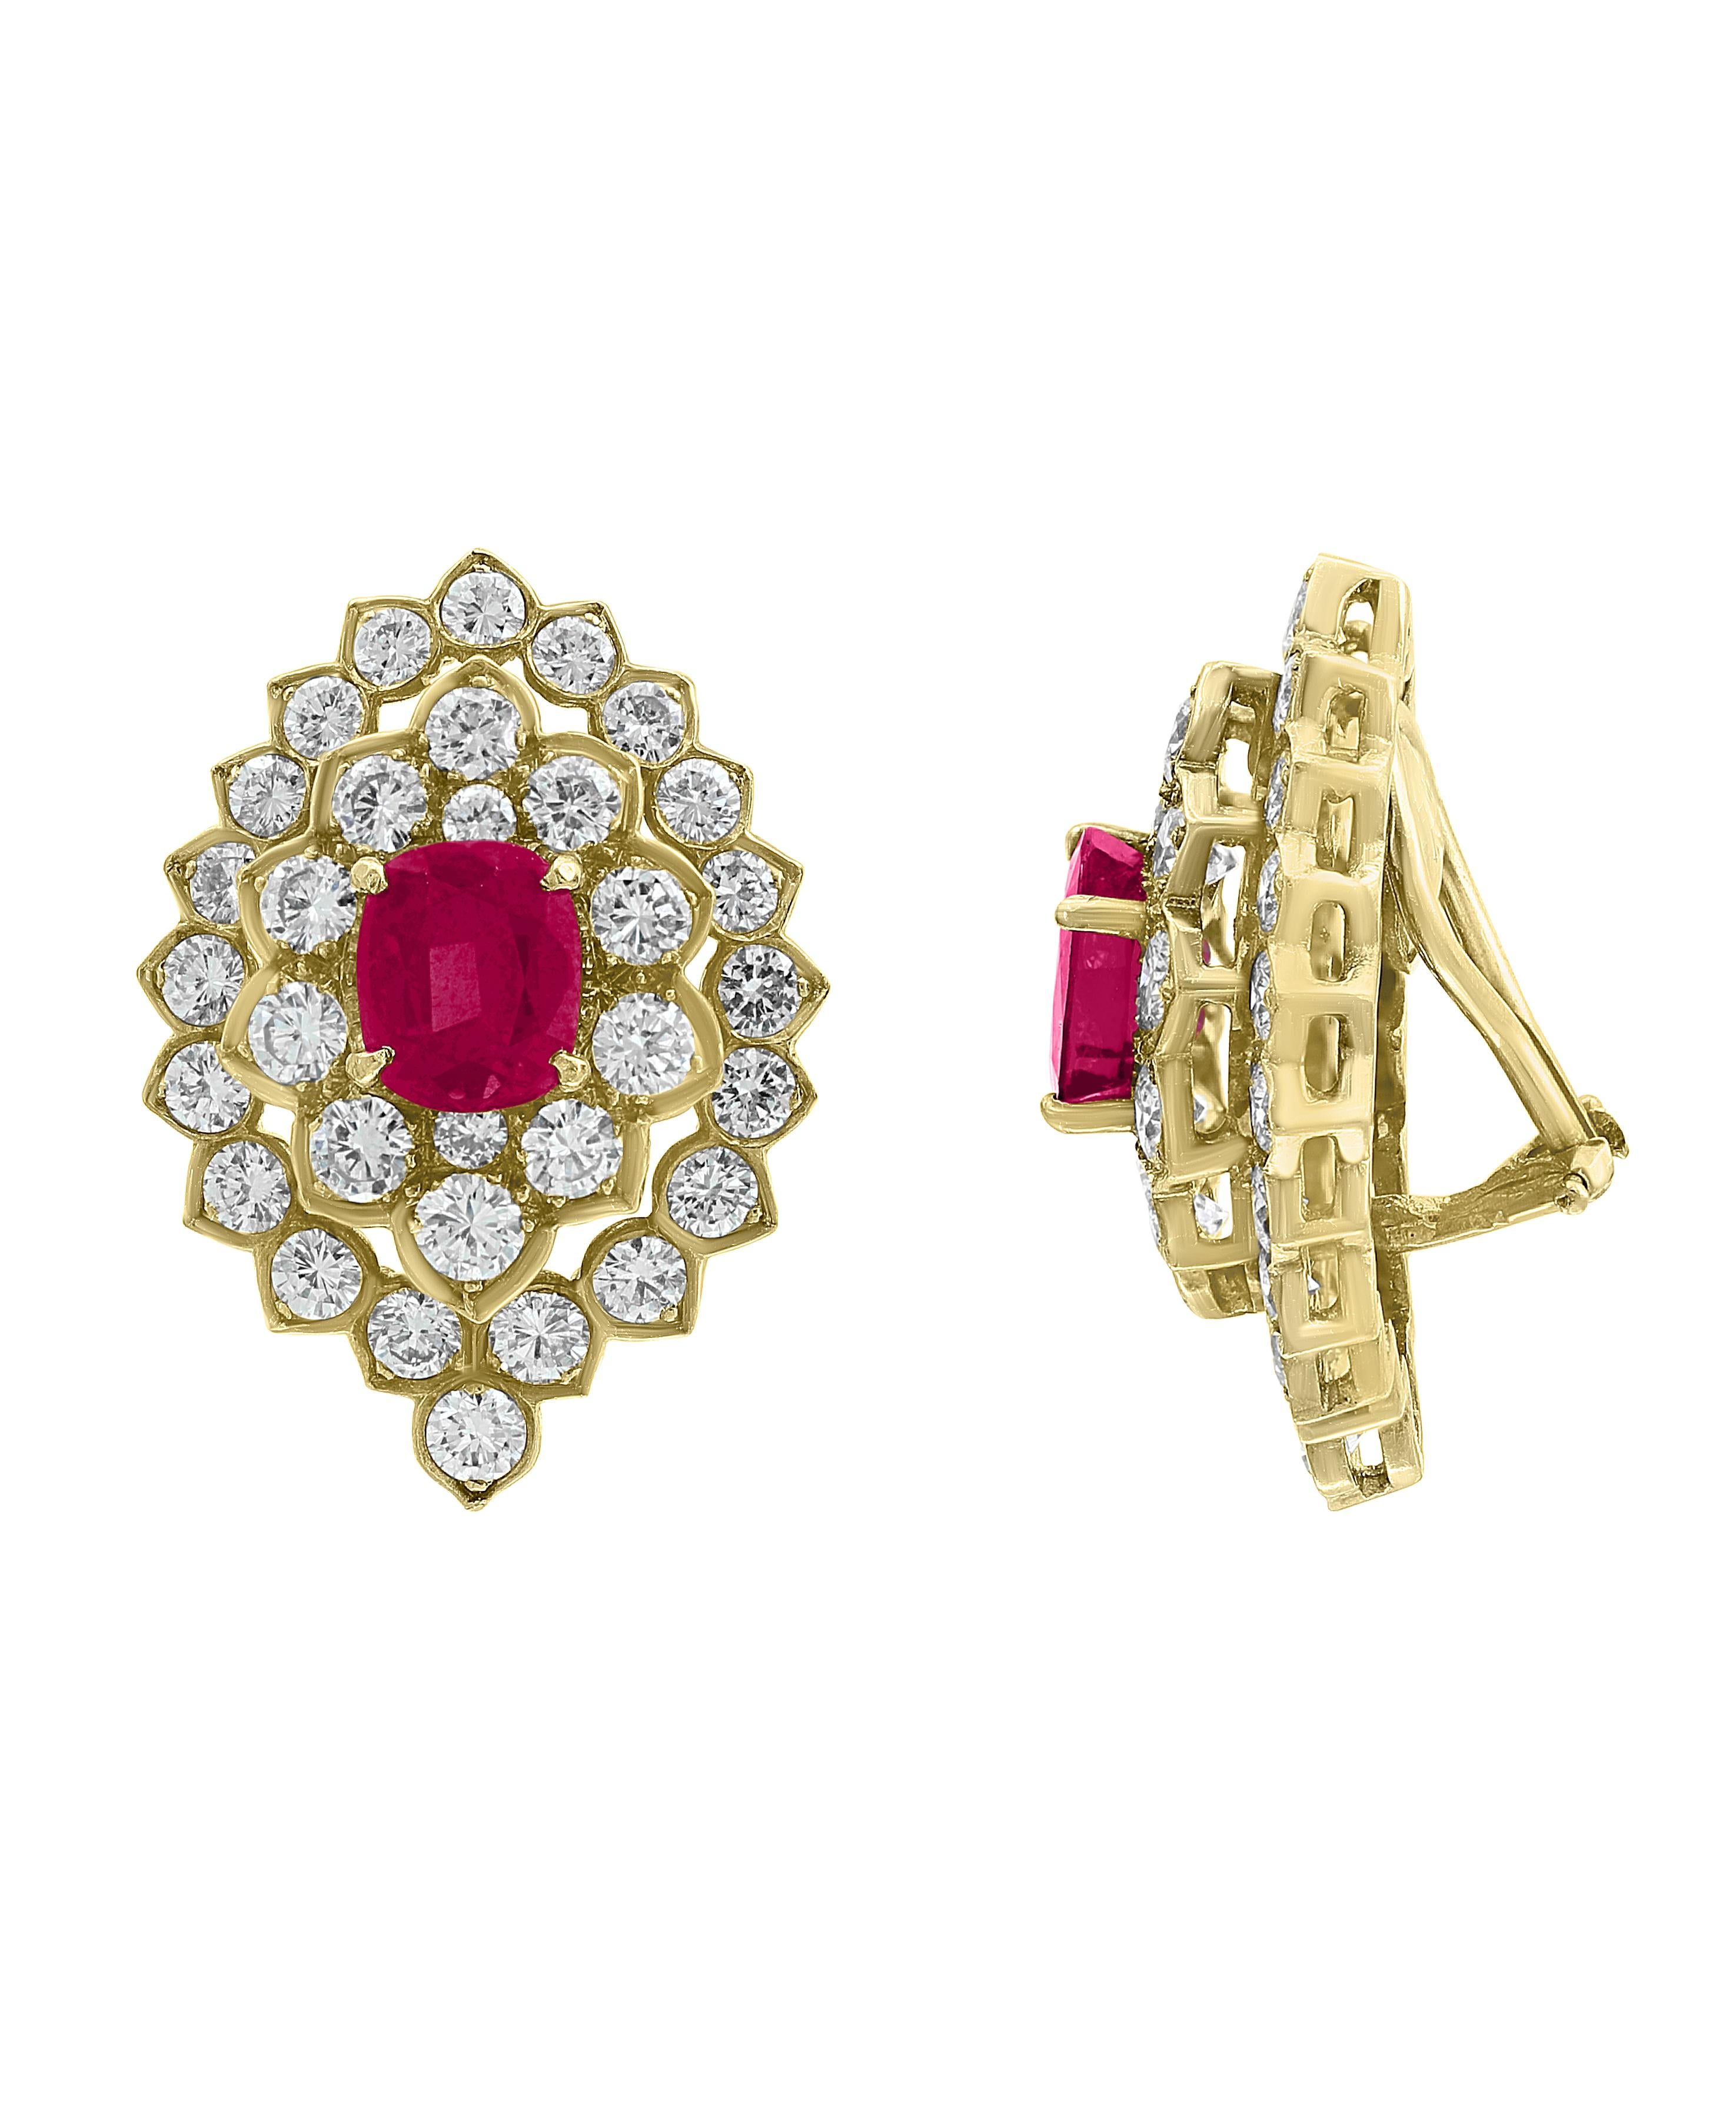 Ruby  And  10 Carat VS  Diamonds  Stud Earrings 18 Karat  Yellow Gold, Estate
These are clip Earrings
This exquisite pair of earrings are beautifully crafted with 18 karat Yellow gold  weighing    
 23 grams
 Ruby approximately 3 ct  are surrounded